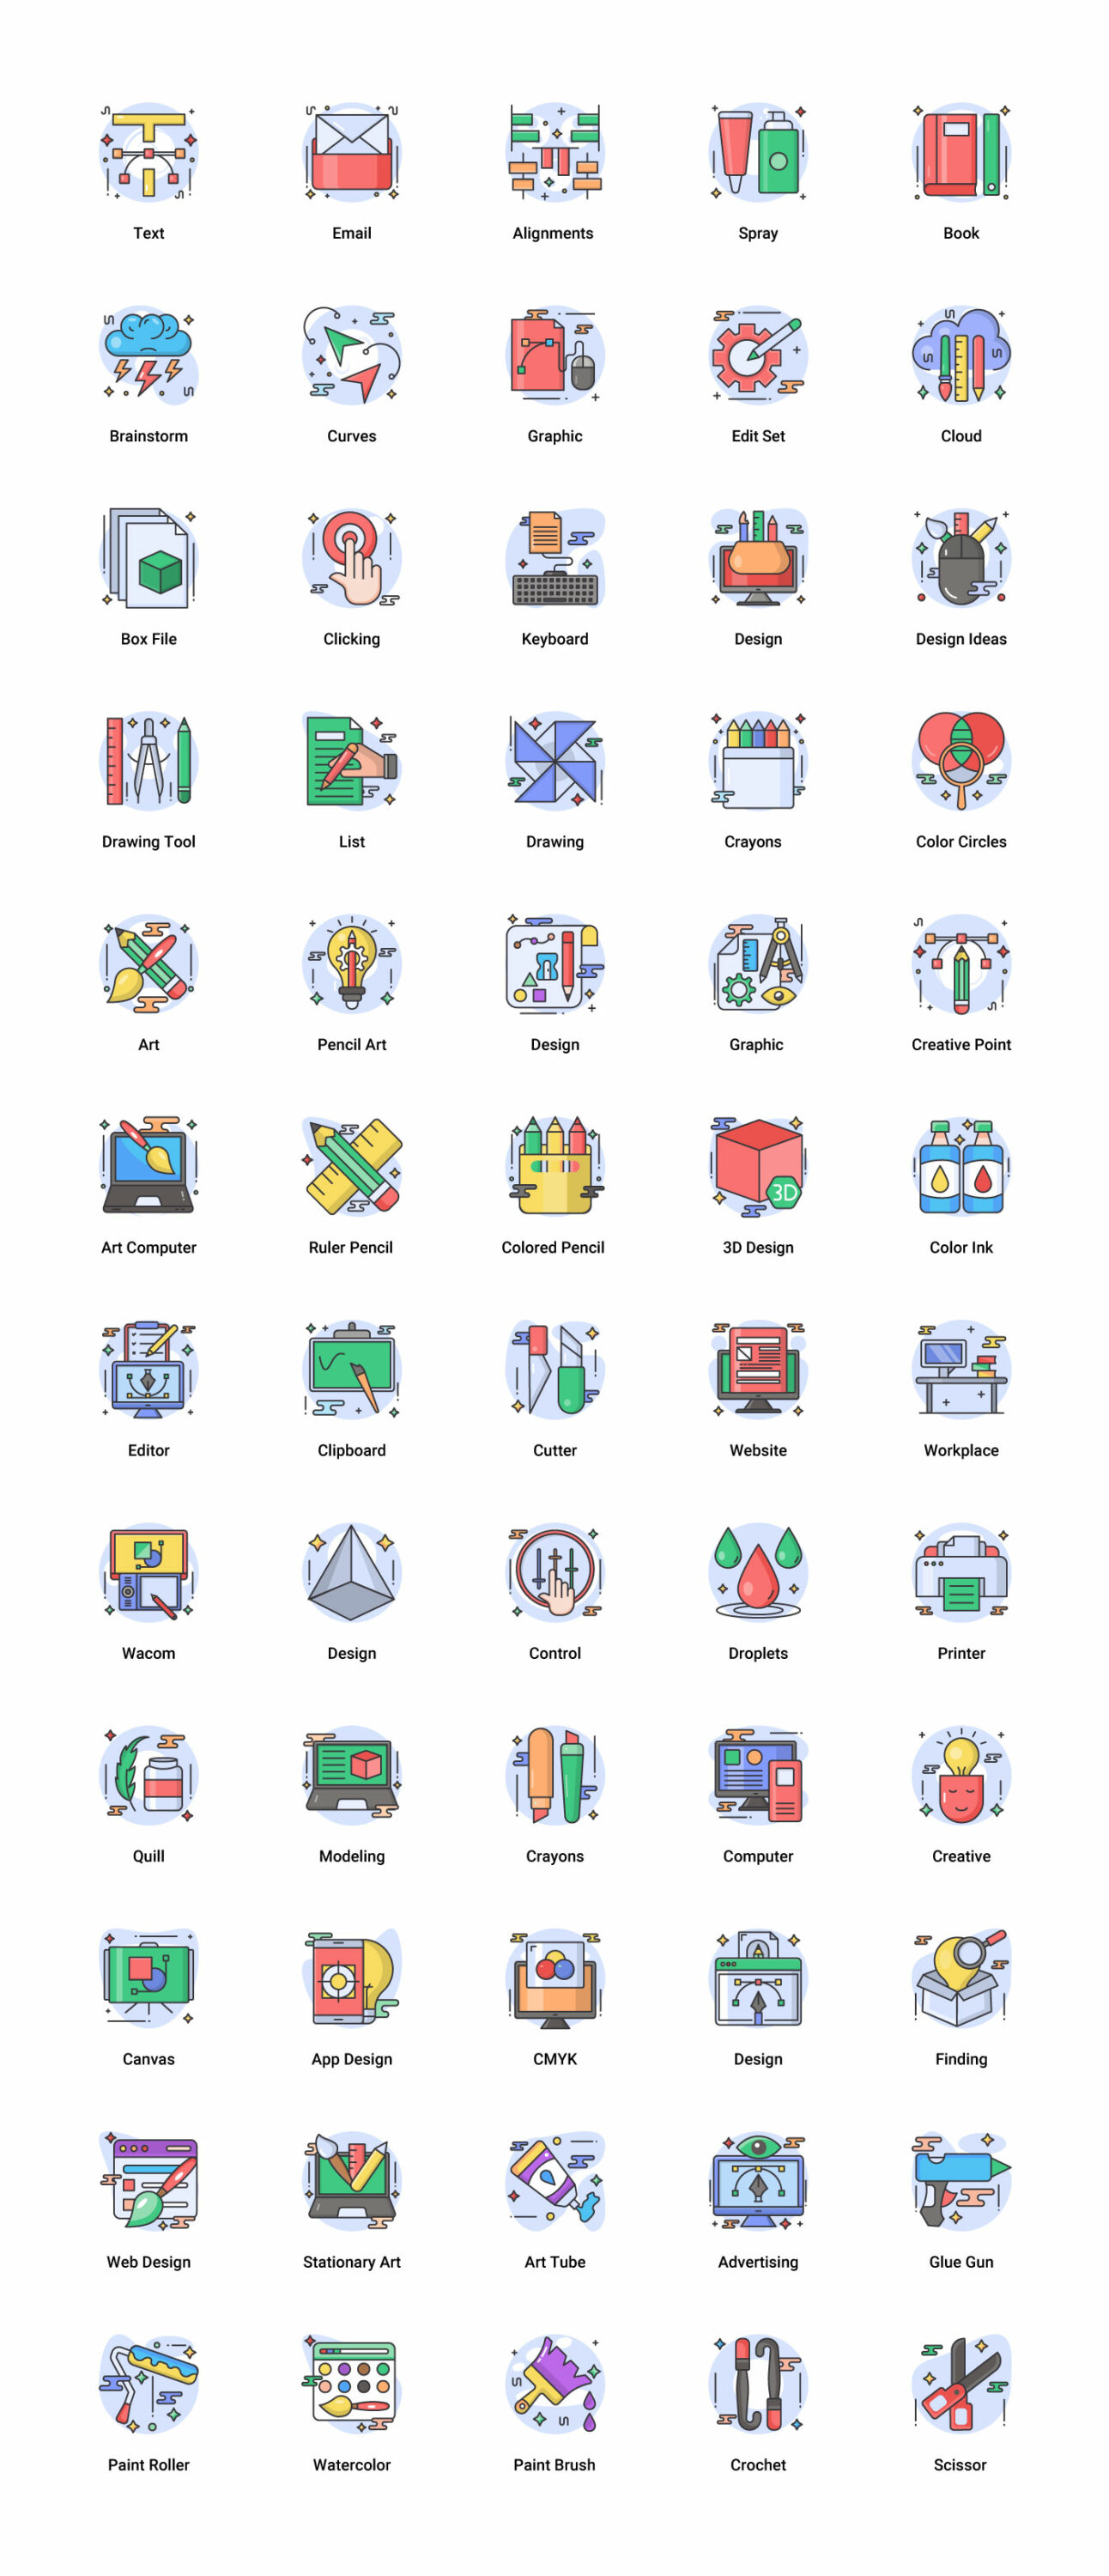 All the icons are easy to use and highly customizable, to fit your needs.